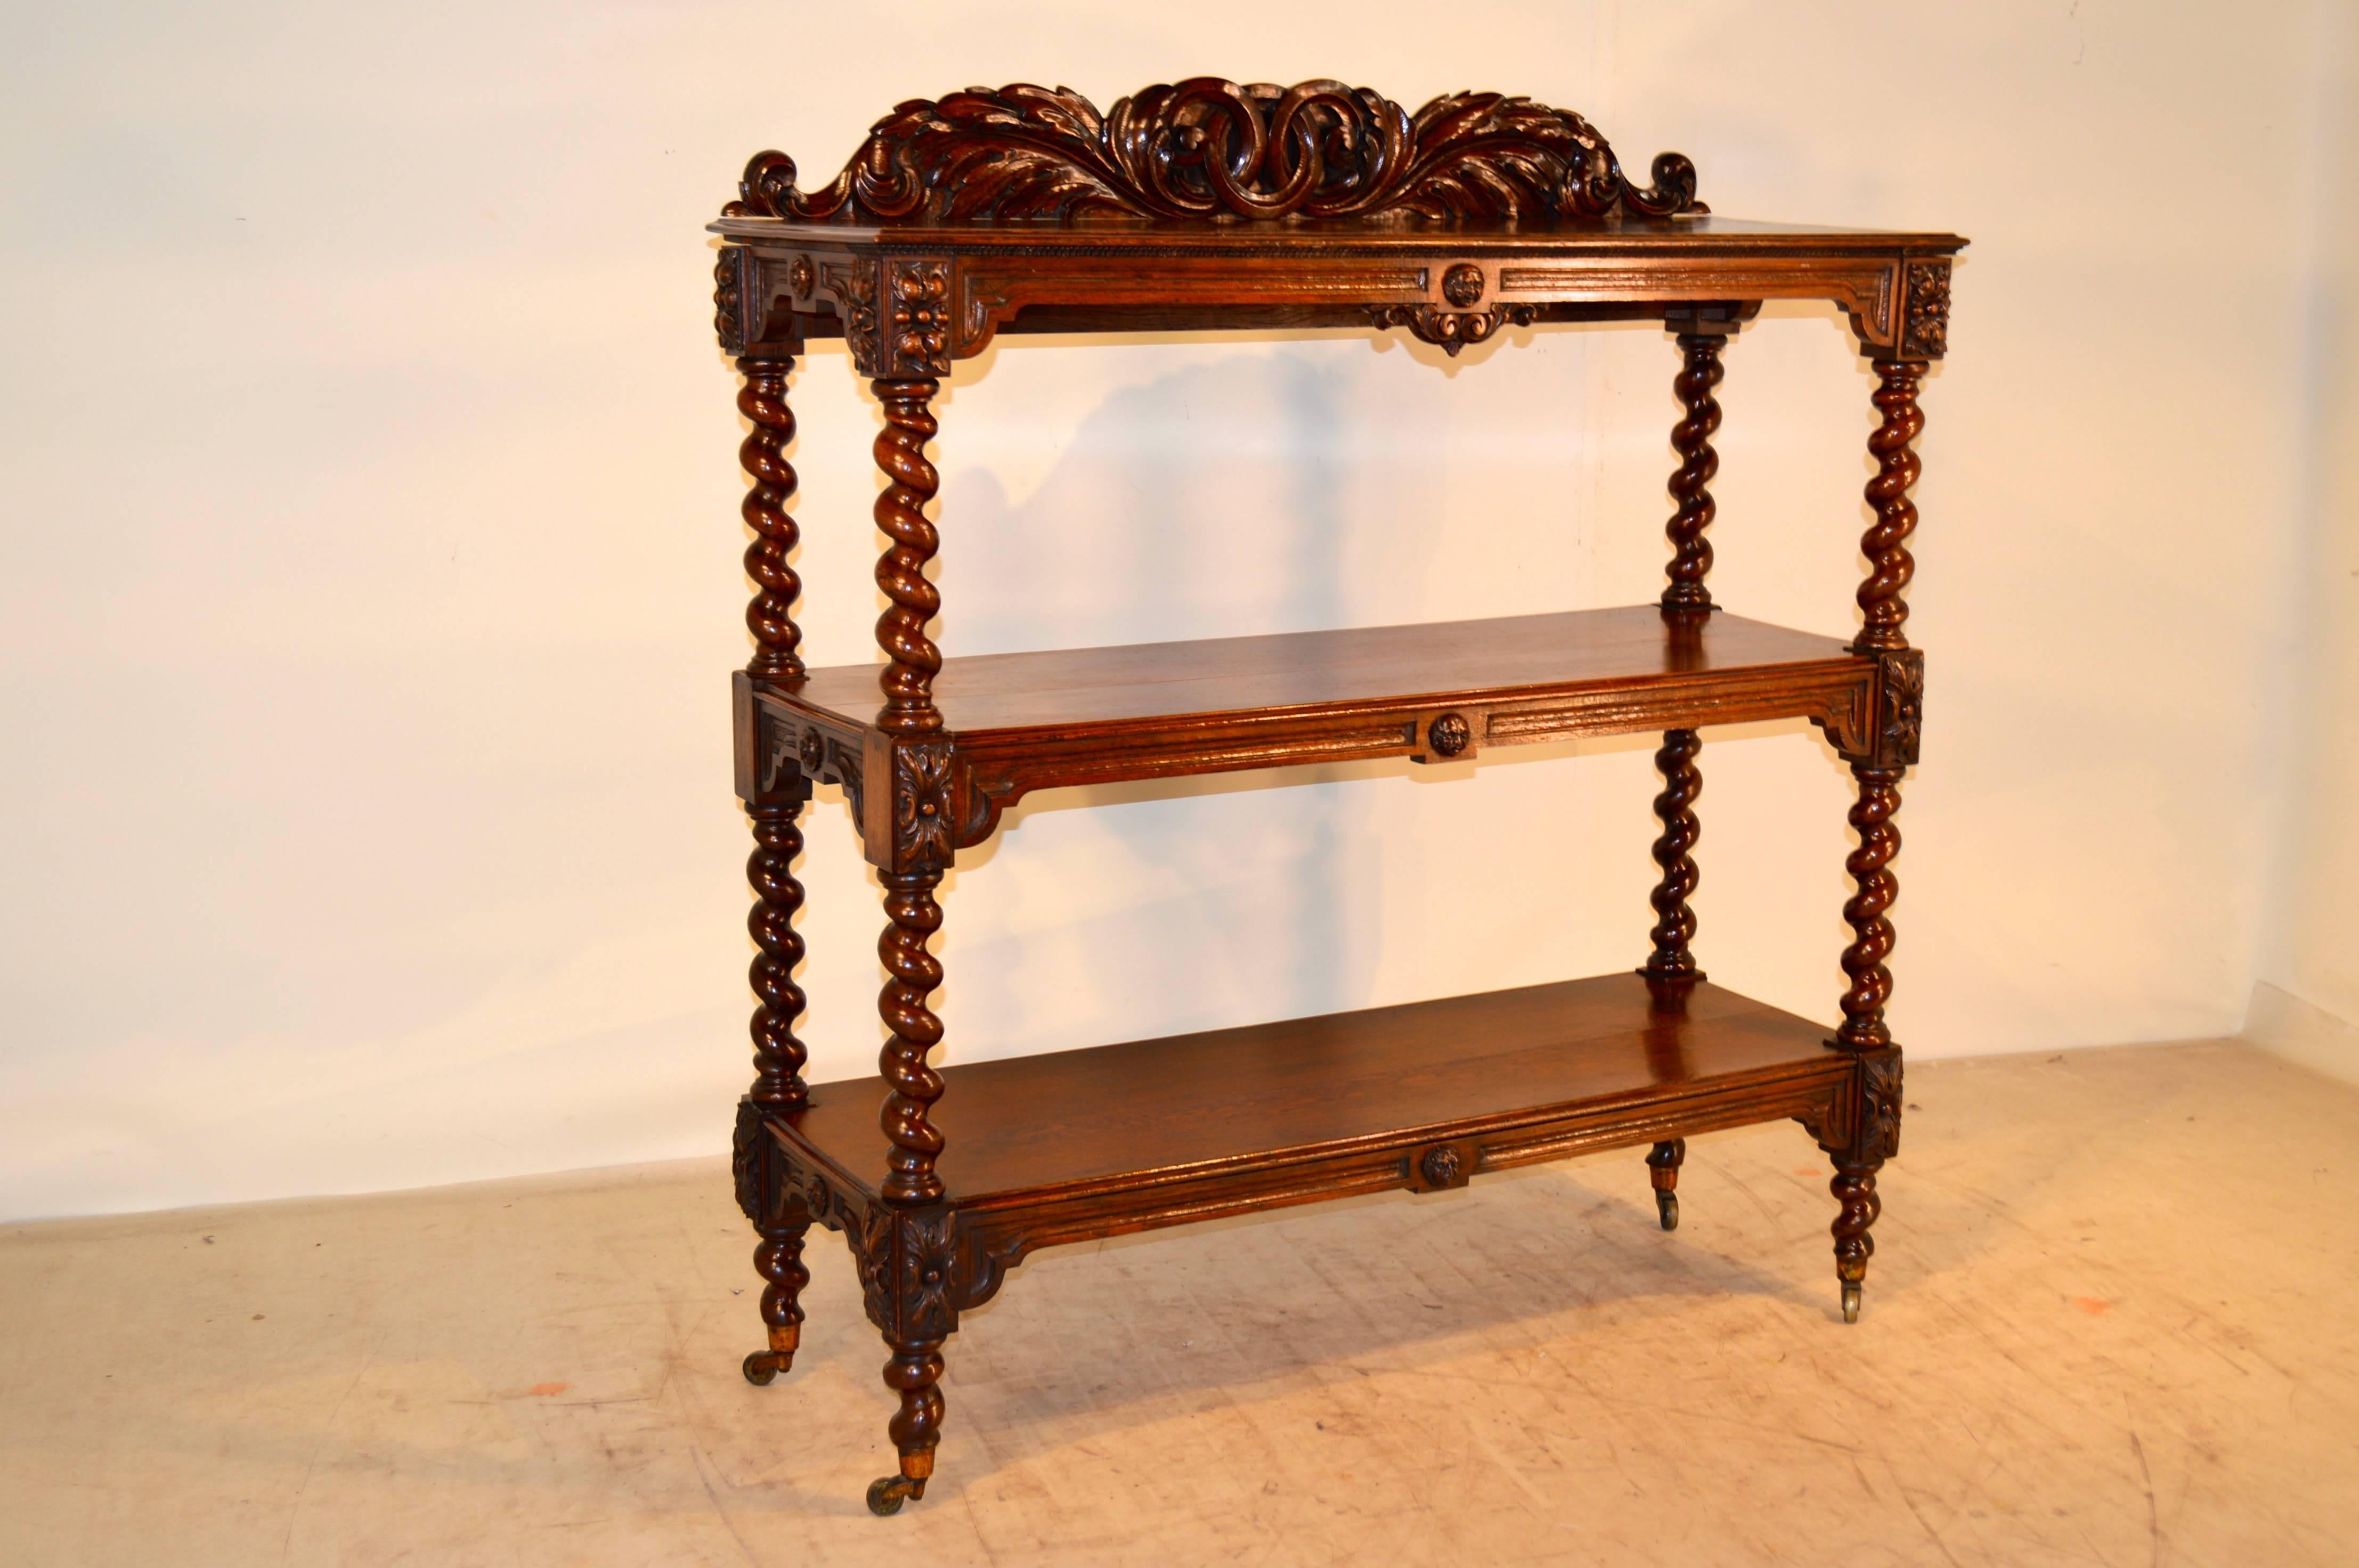 Large 19th century French oak dumbwaiter. The backsplash is carved with an acanthus leaf and joined ring decoration, following down to three shelves, all with beveled edges and separated with hand-turned barley-twist shelf supports. Each shelf has a